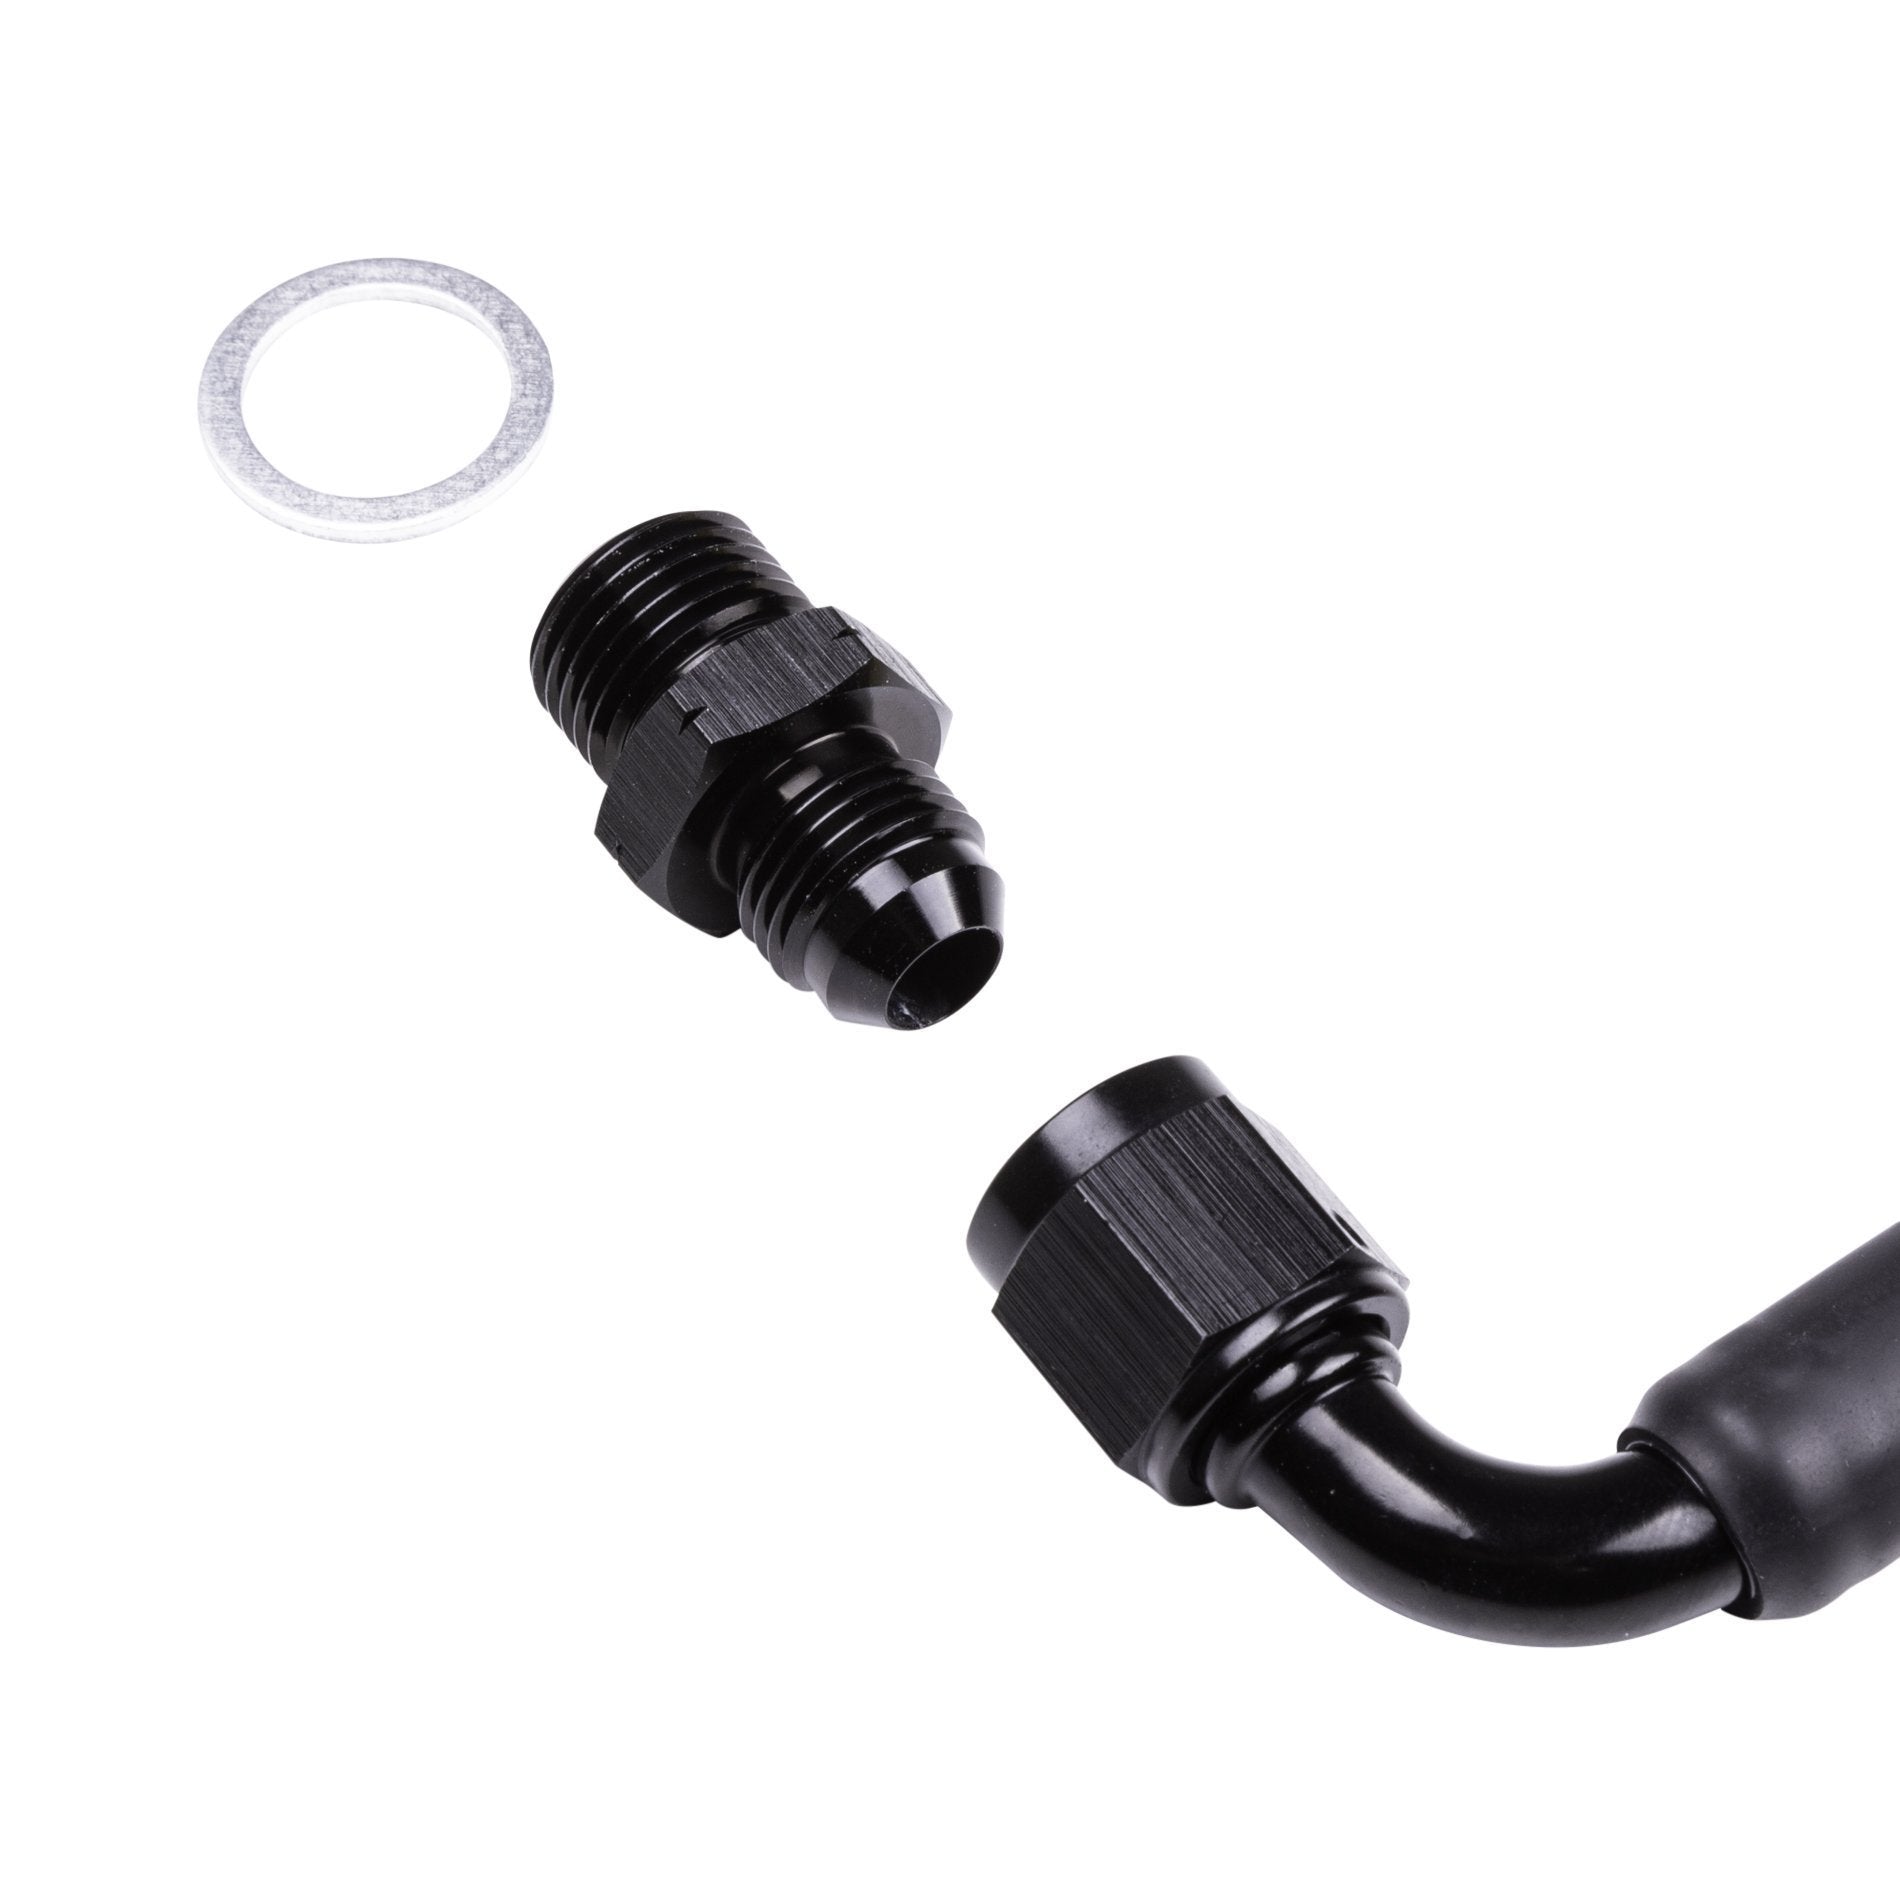 CHASE BAYS BMW E36 high pressure hose power steering with BMW engine